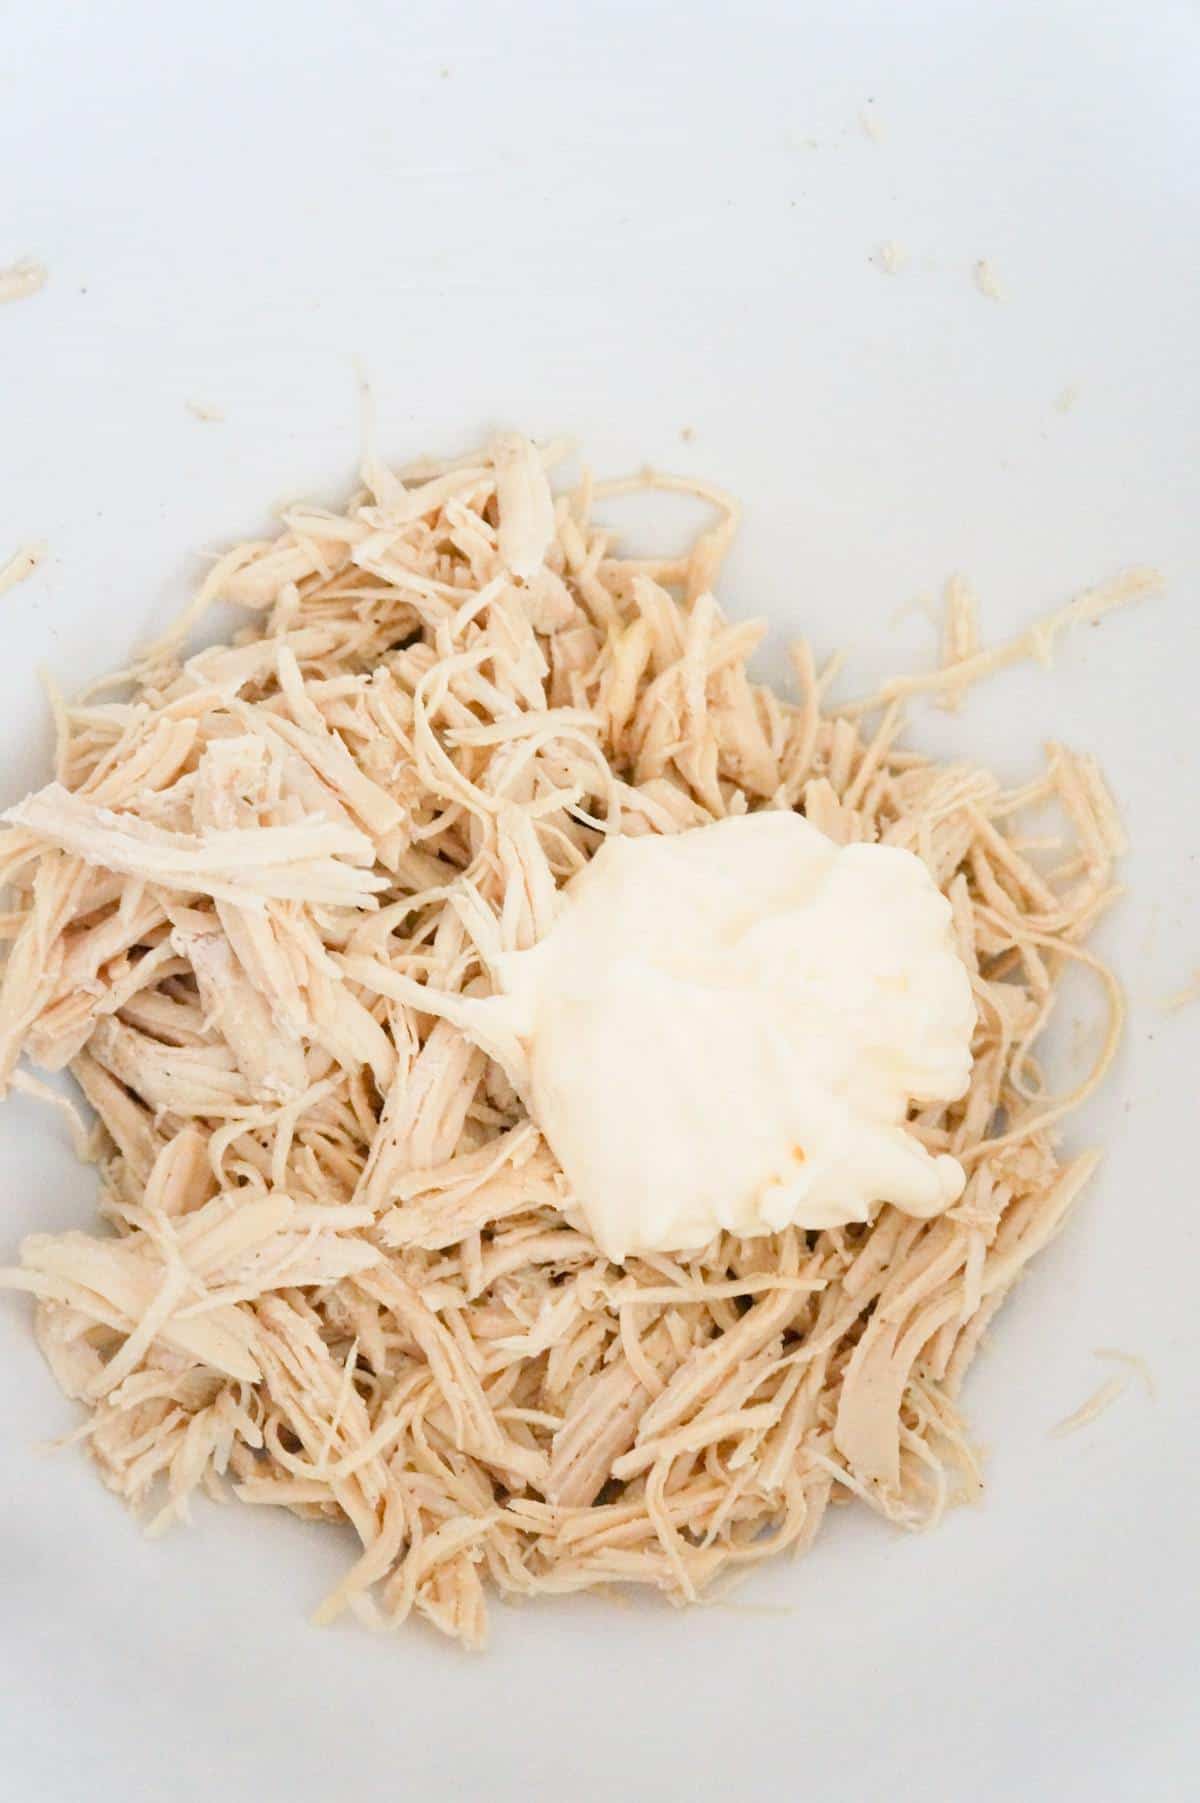 mayo on top of shredded chicken in a mixing bowl